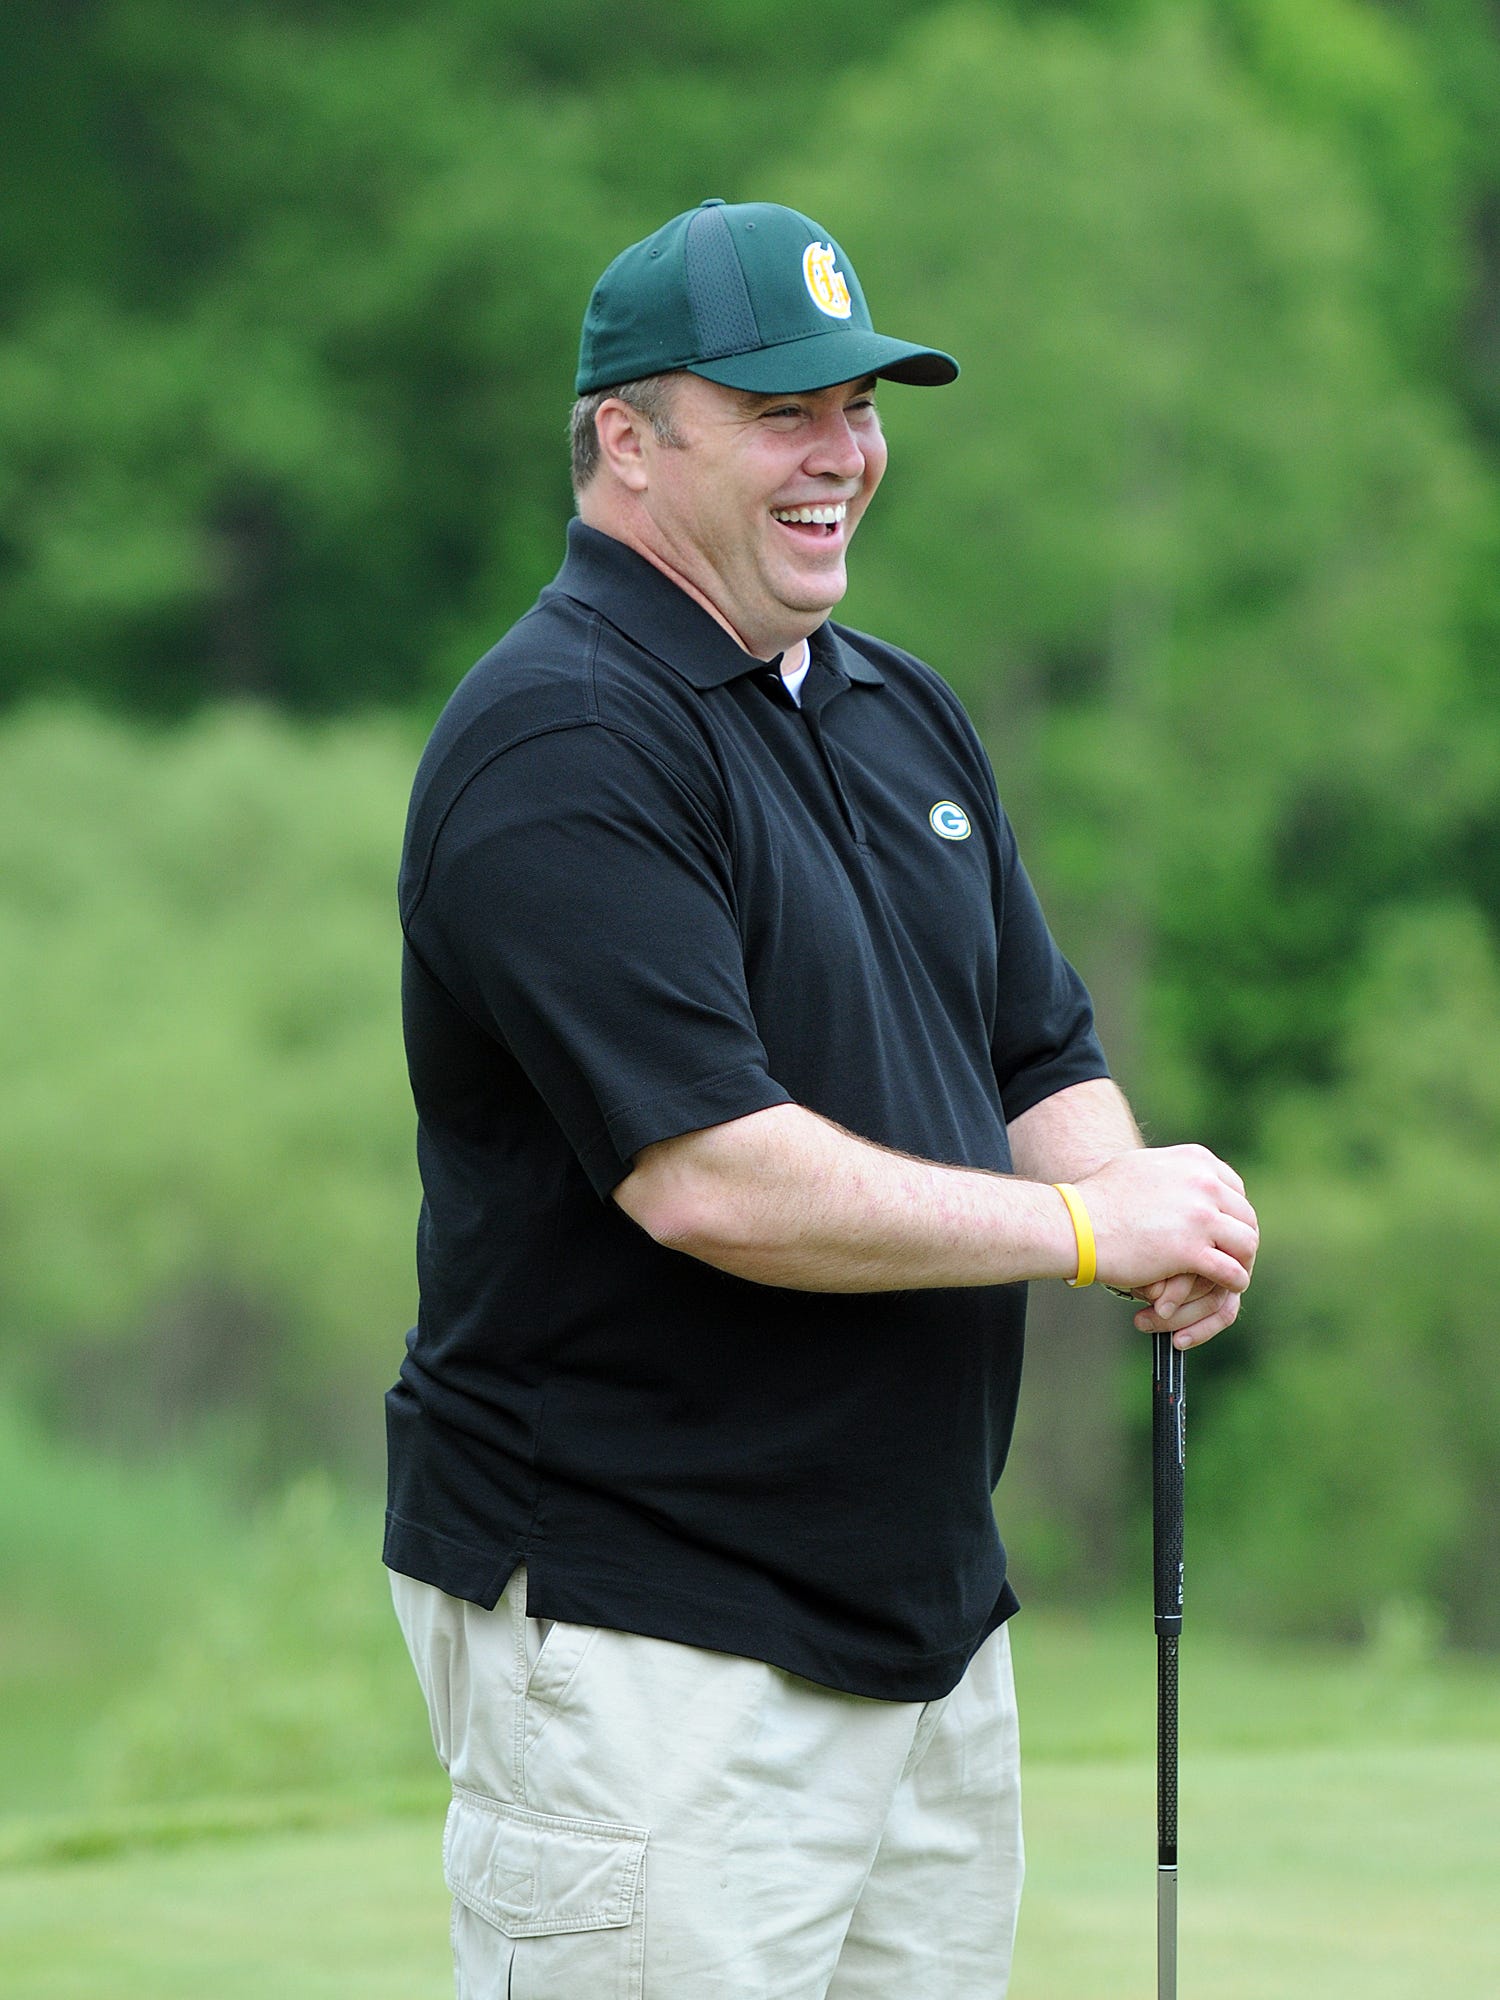 Green Bay Packers coach Mike McCarthy reacts while waiting to pose for photographs with golfers on the first tee box at the Mike McCarthy Cystic Fibrosis Celebrity Golf Tournament on June 6, 2011, at the Green Bay Country Club.